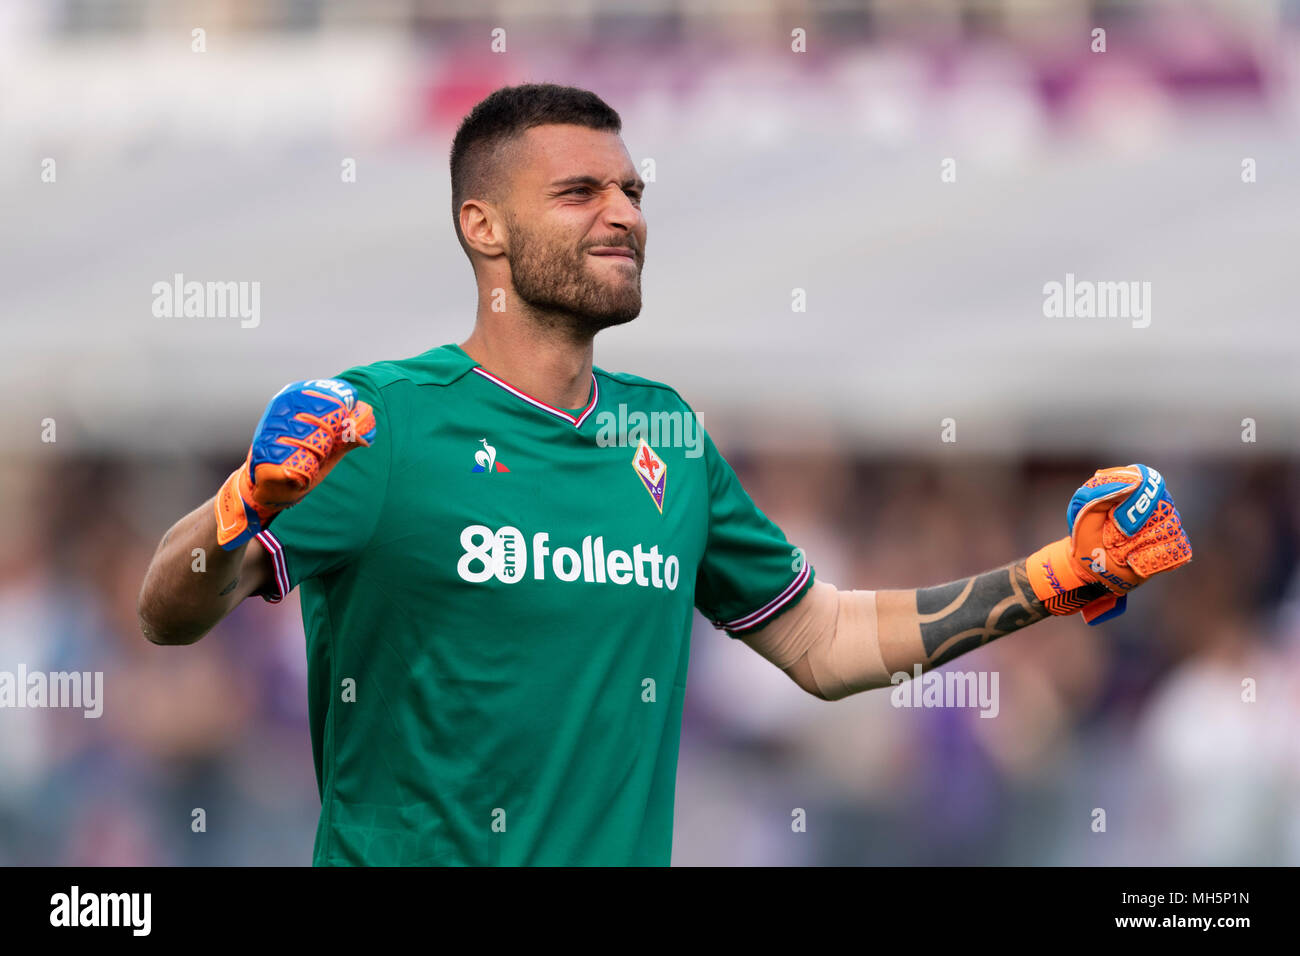 Marco Sportiello of Fiorentina celebrates after scoring his team's first  goal during the Italian "Serie A" match between Fiorentina 3-0 Napoli at  Artemio Franchi Stadium on April 29, 2018 in Firenze, Italy.